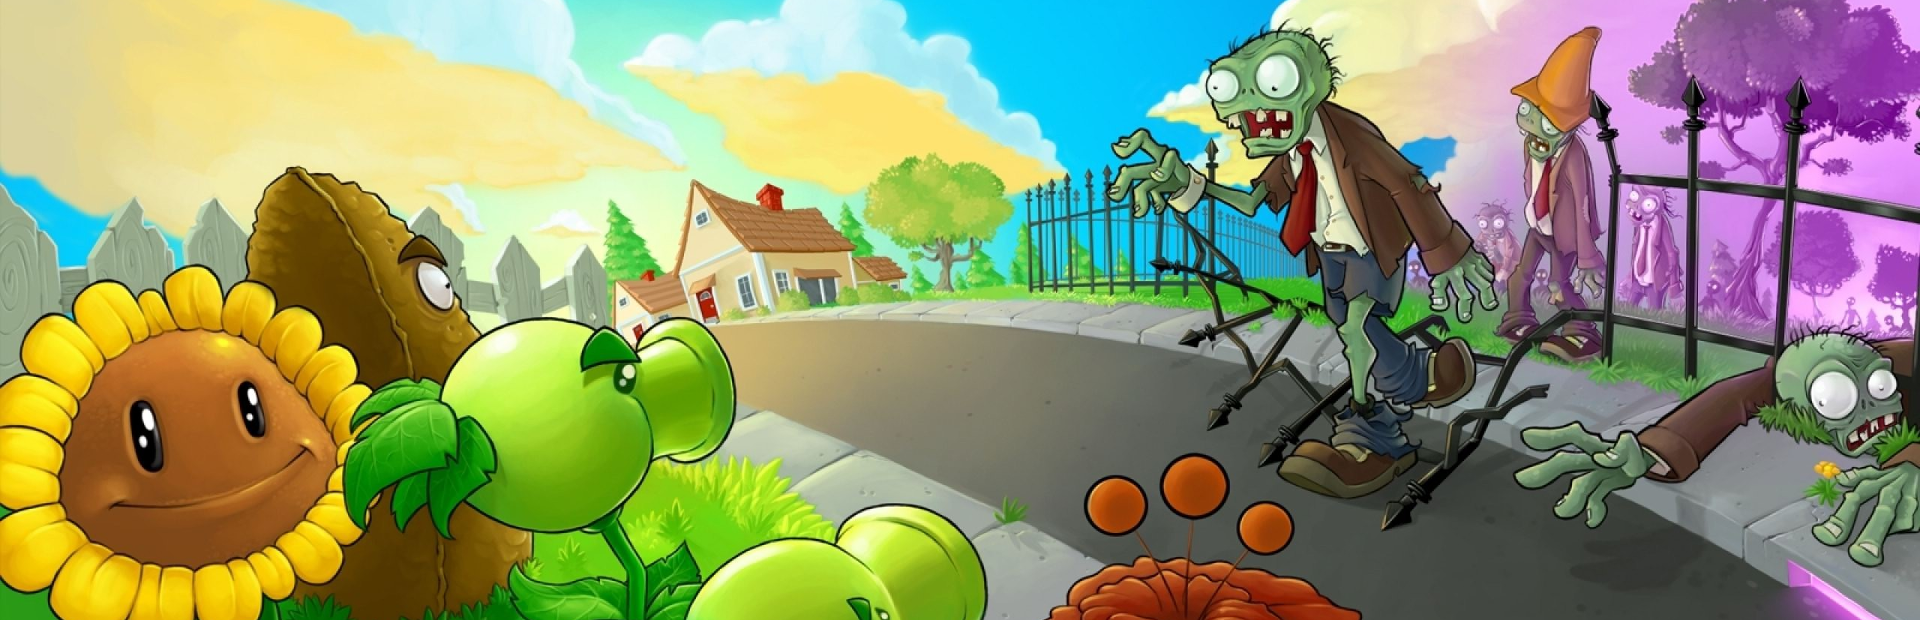 Is plants vs zombies 2 on steam фото 27